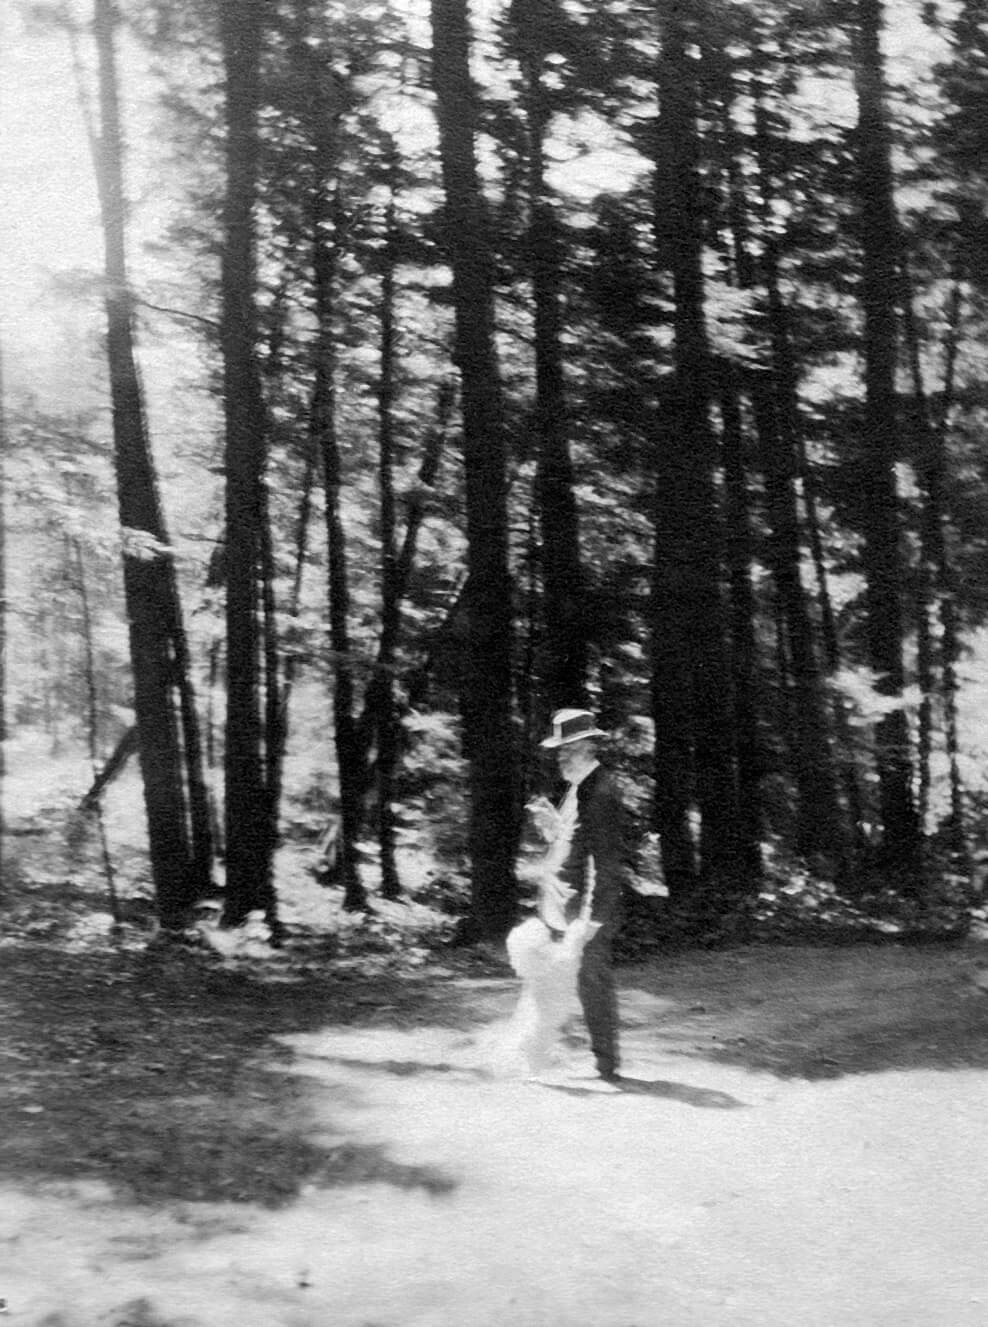 Homer Watson with Rex the dog in Cressman’s Woods, 1925